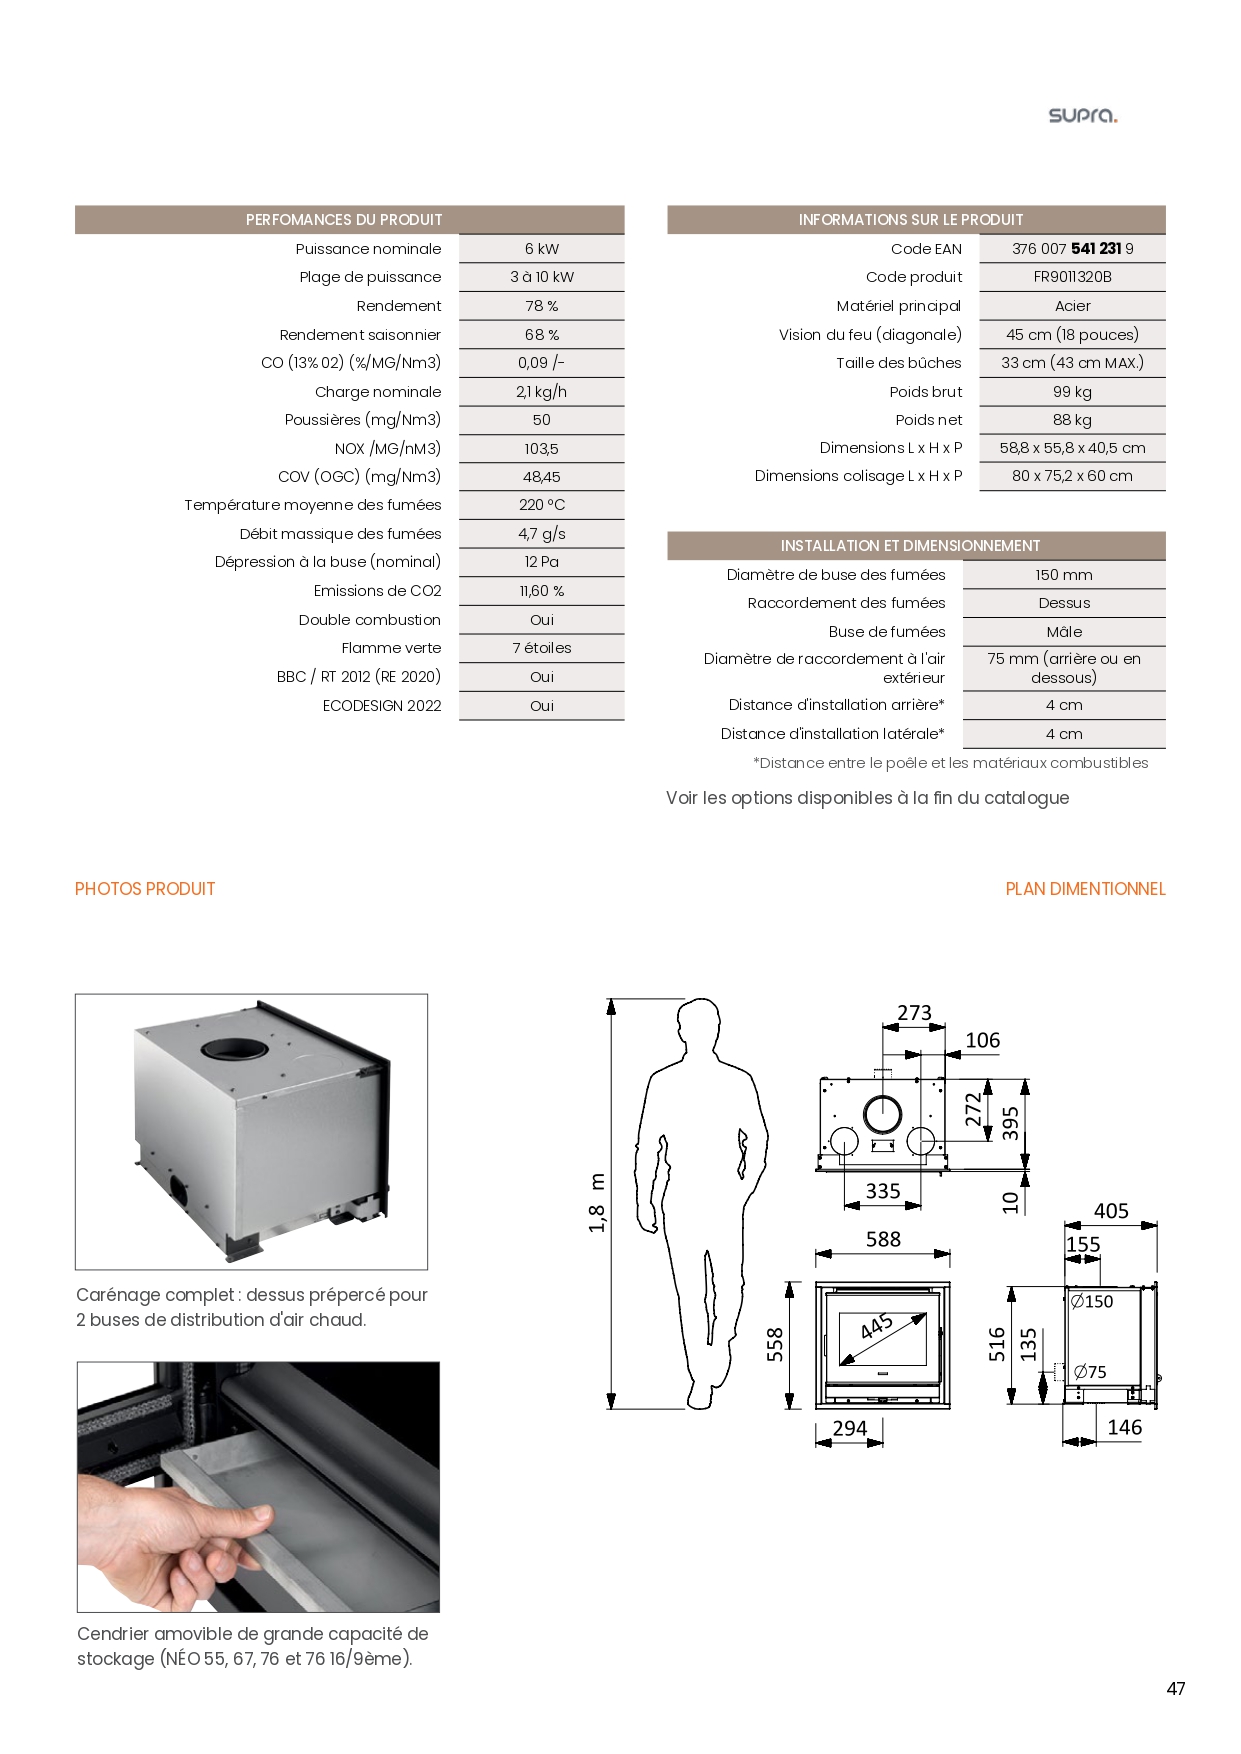 CATALOGUE SUPRA biomasse-gsb-FRANCE-pages_page-0047